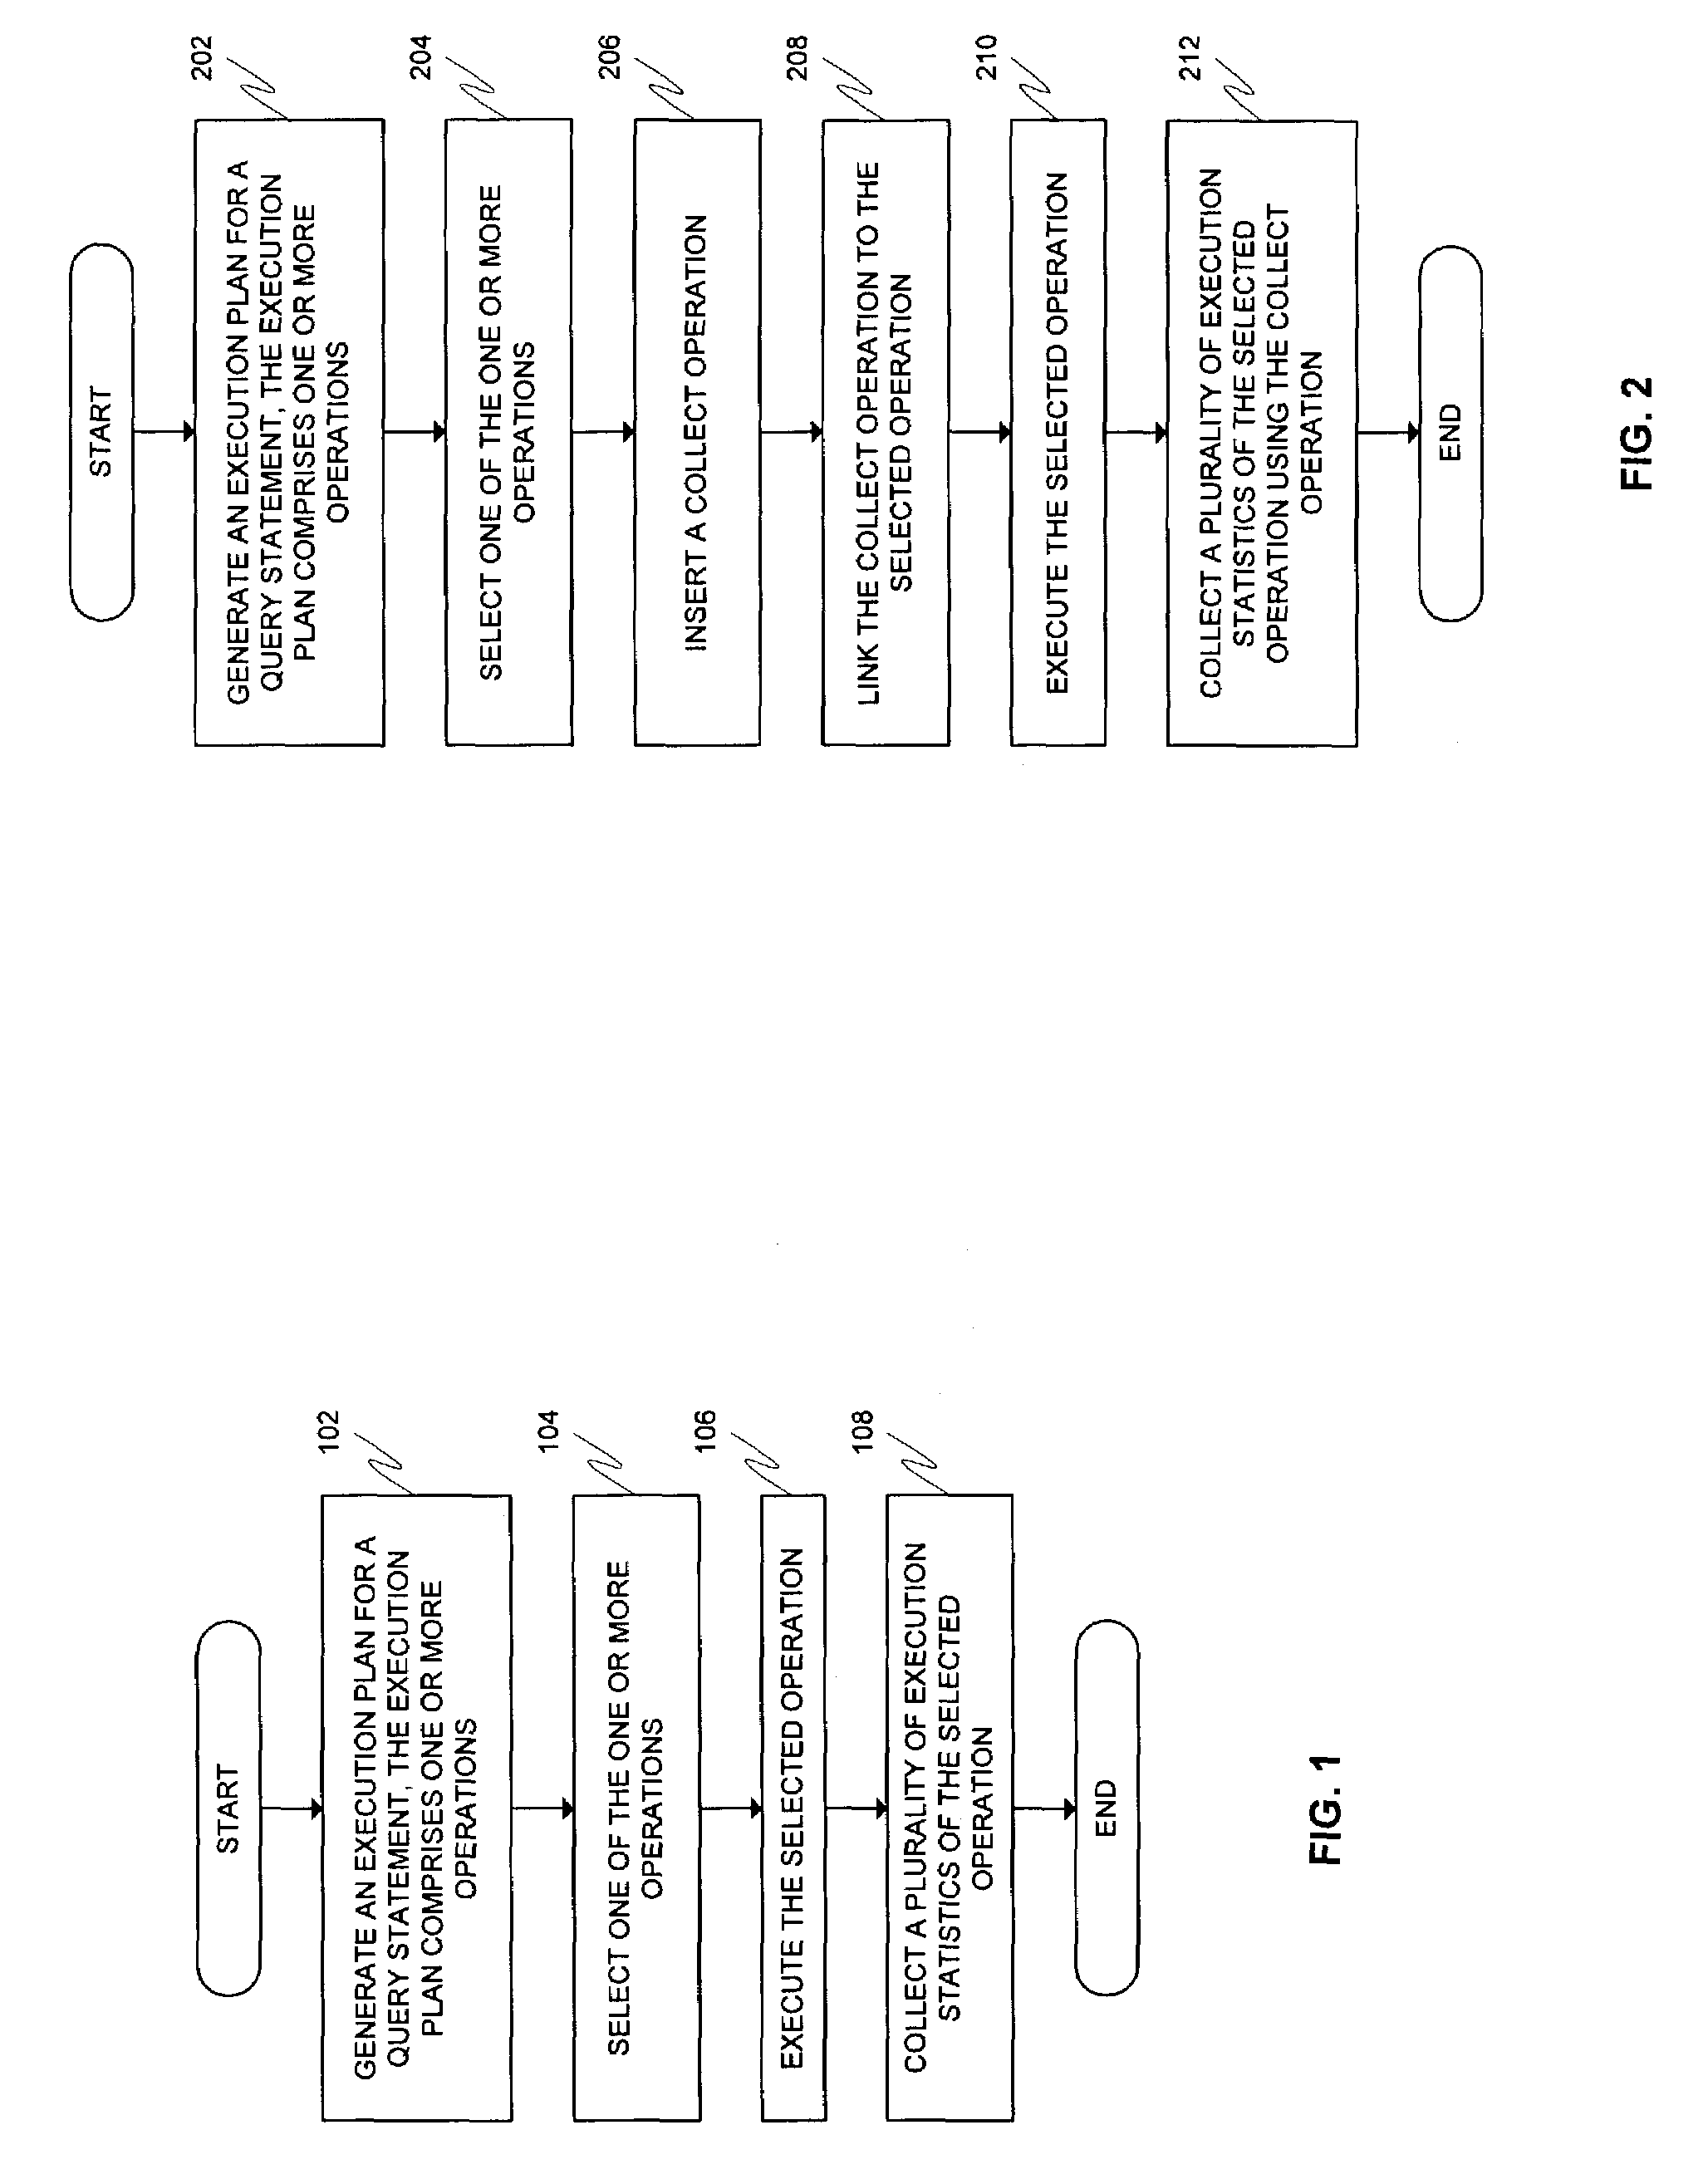 Method and system of collecting execution statistics of query statements